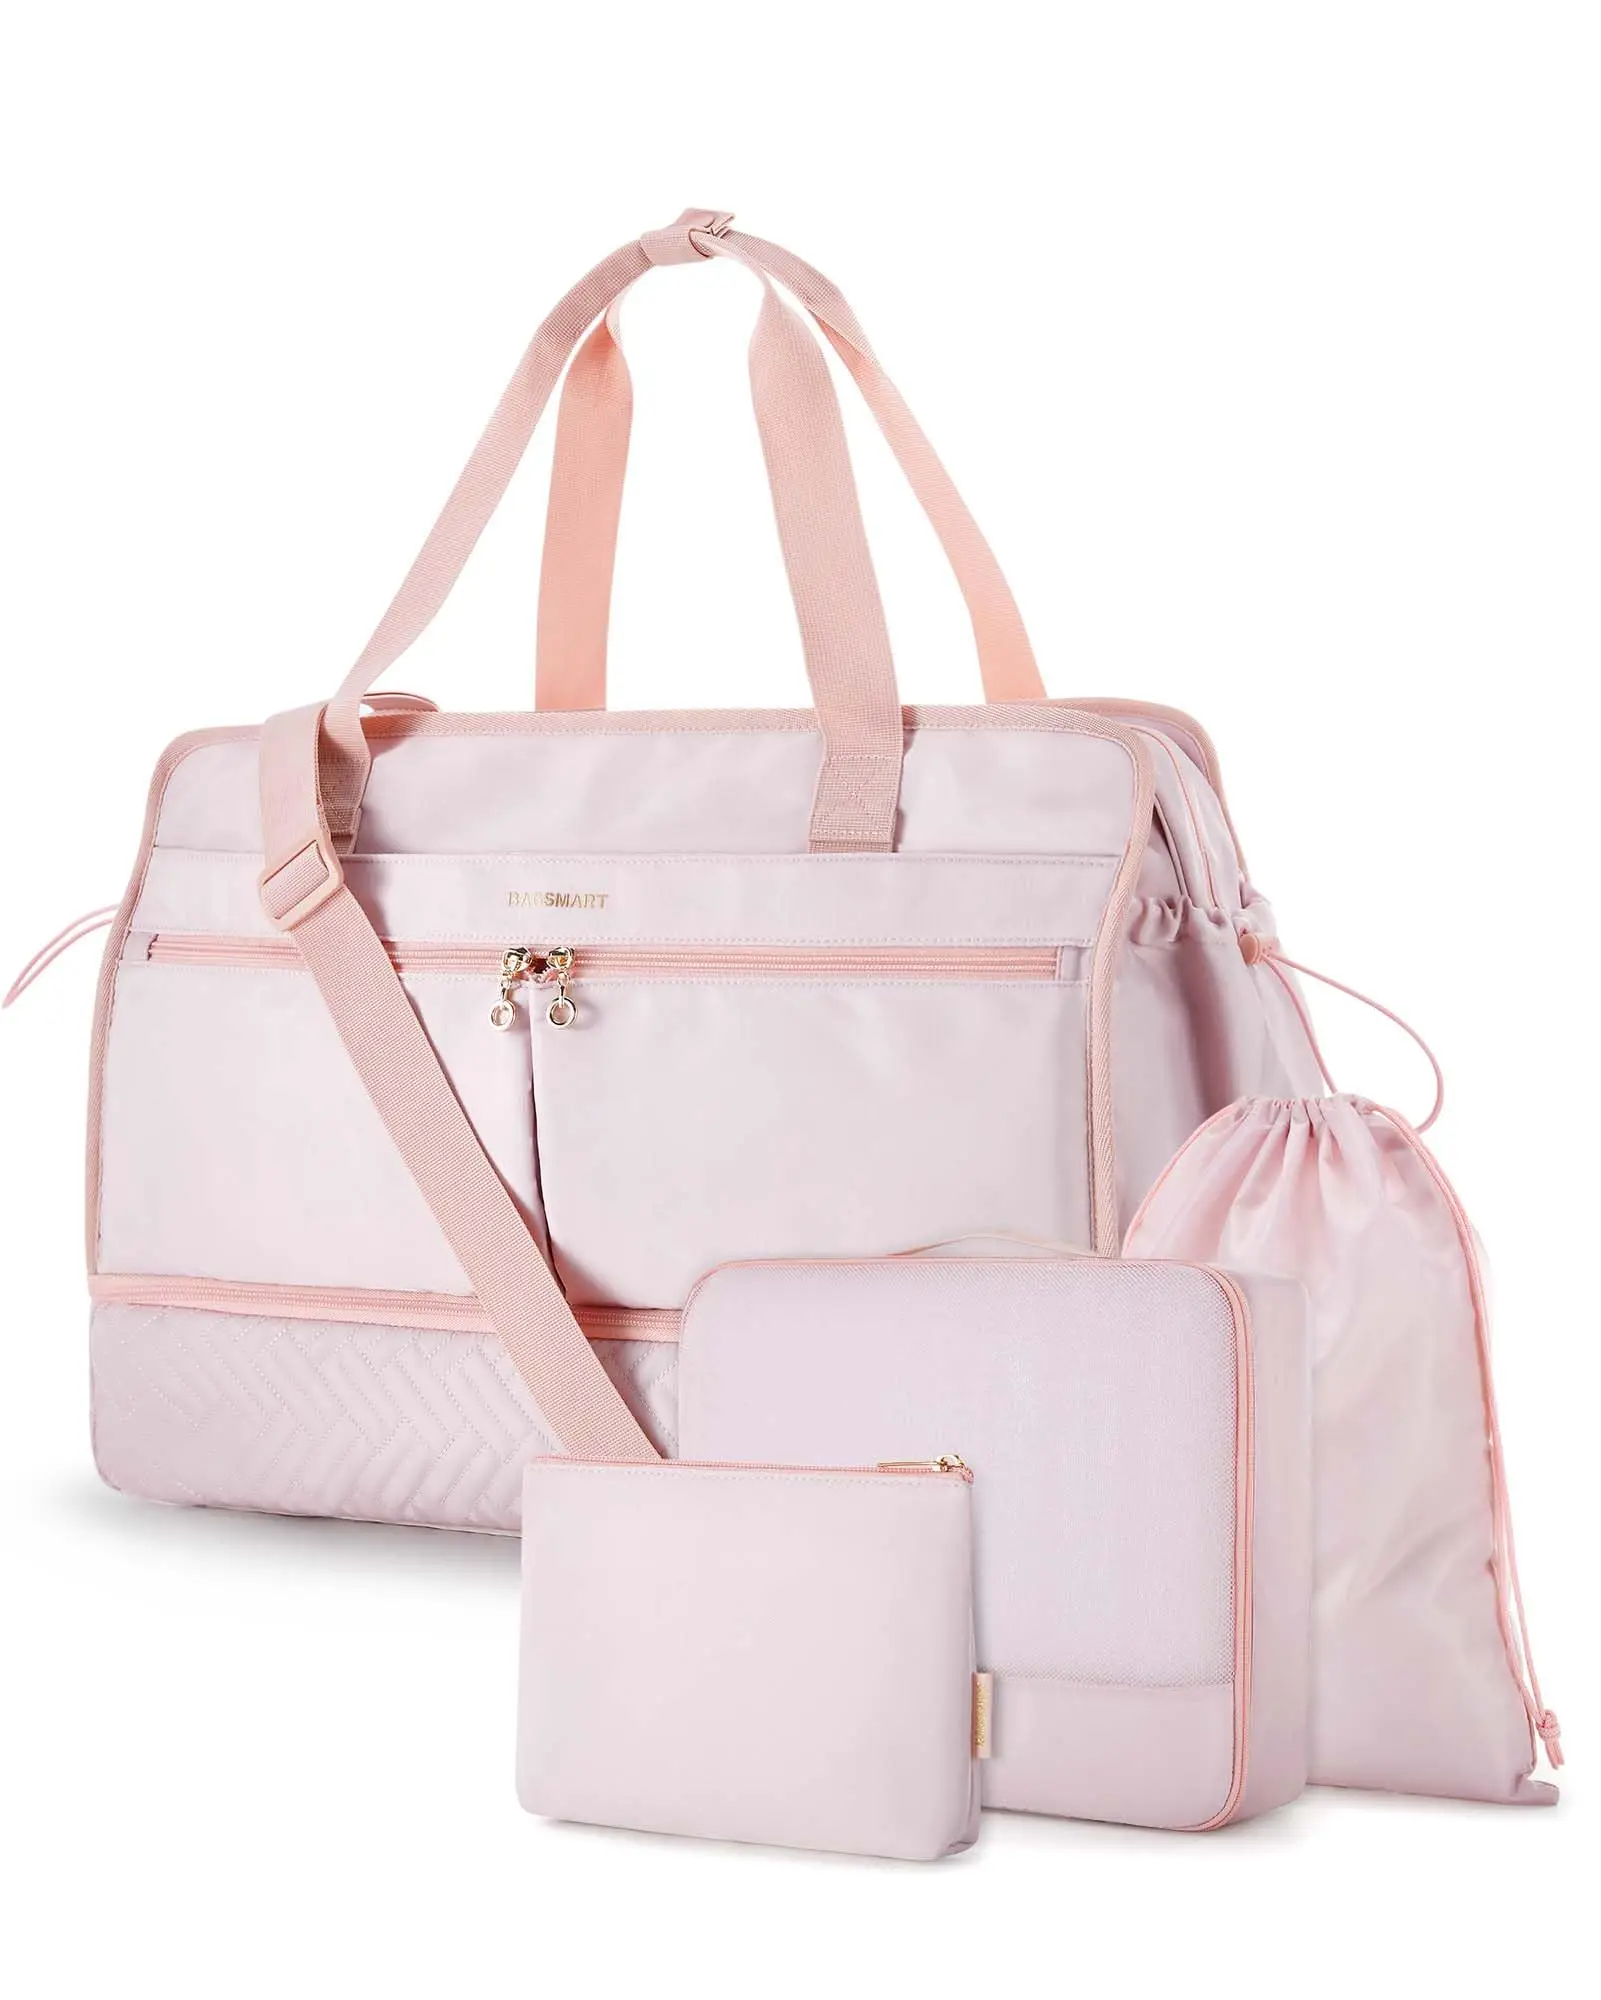 

Women's 40L Weekender Bag - Carry-On Overnight Duffel for Travel or Gym, with Shoe Compartment.